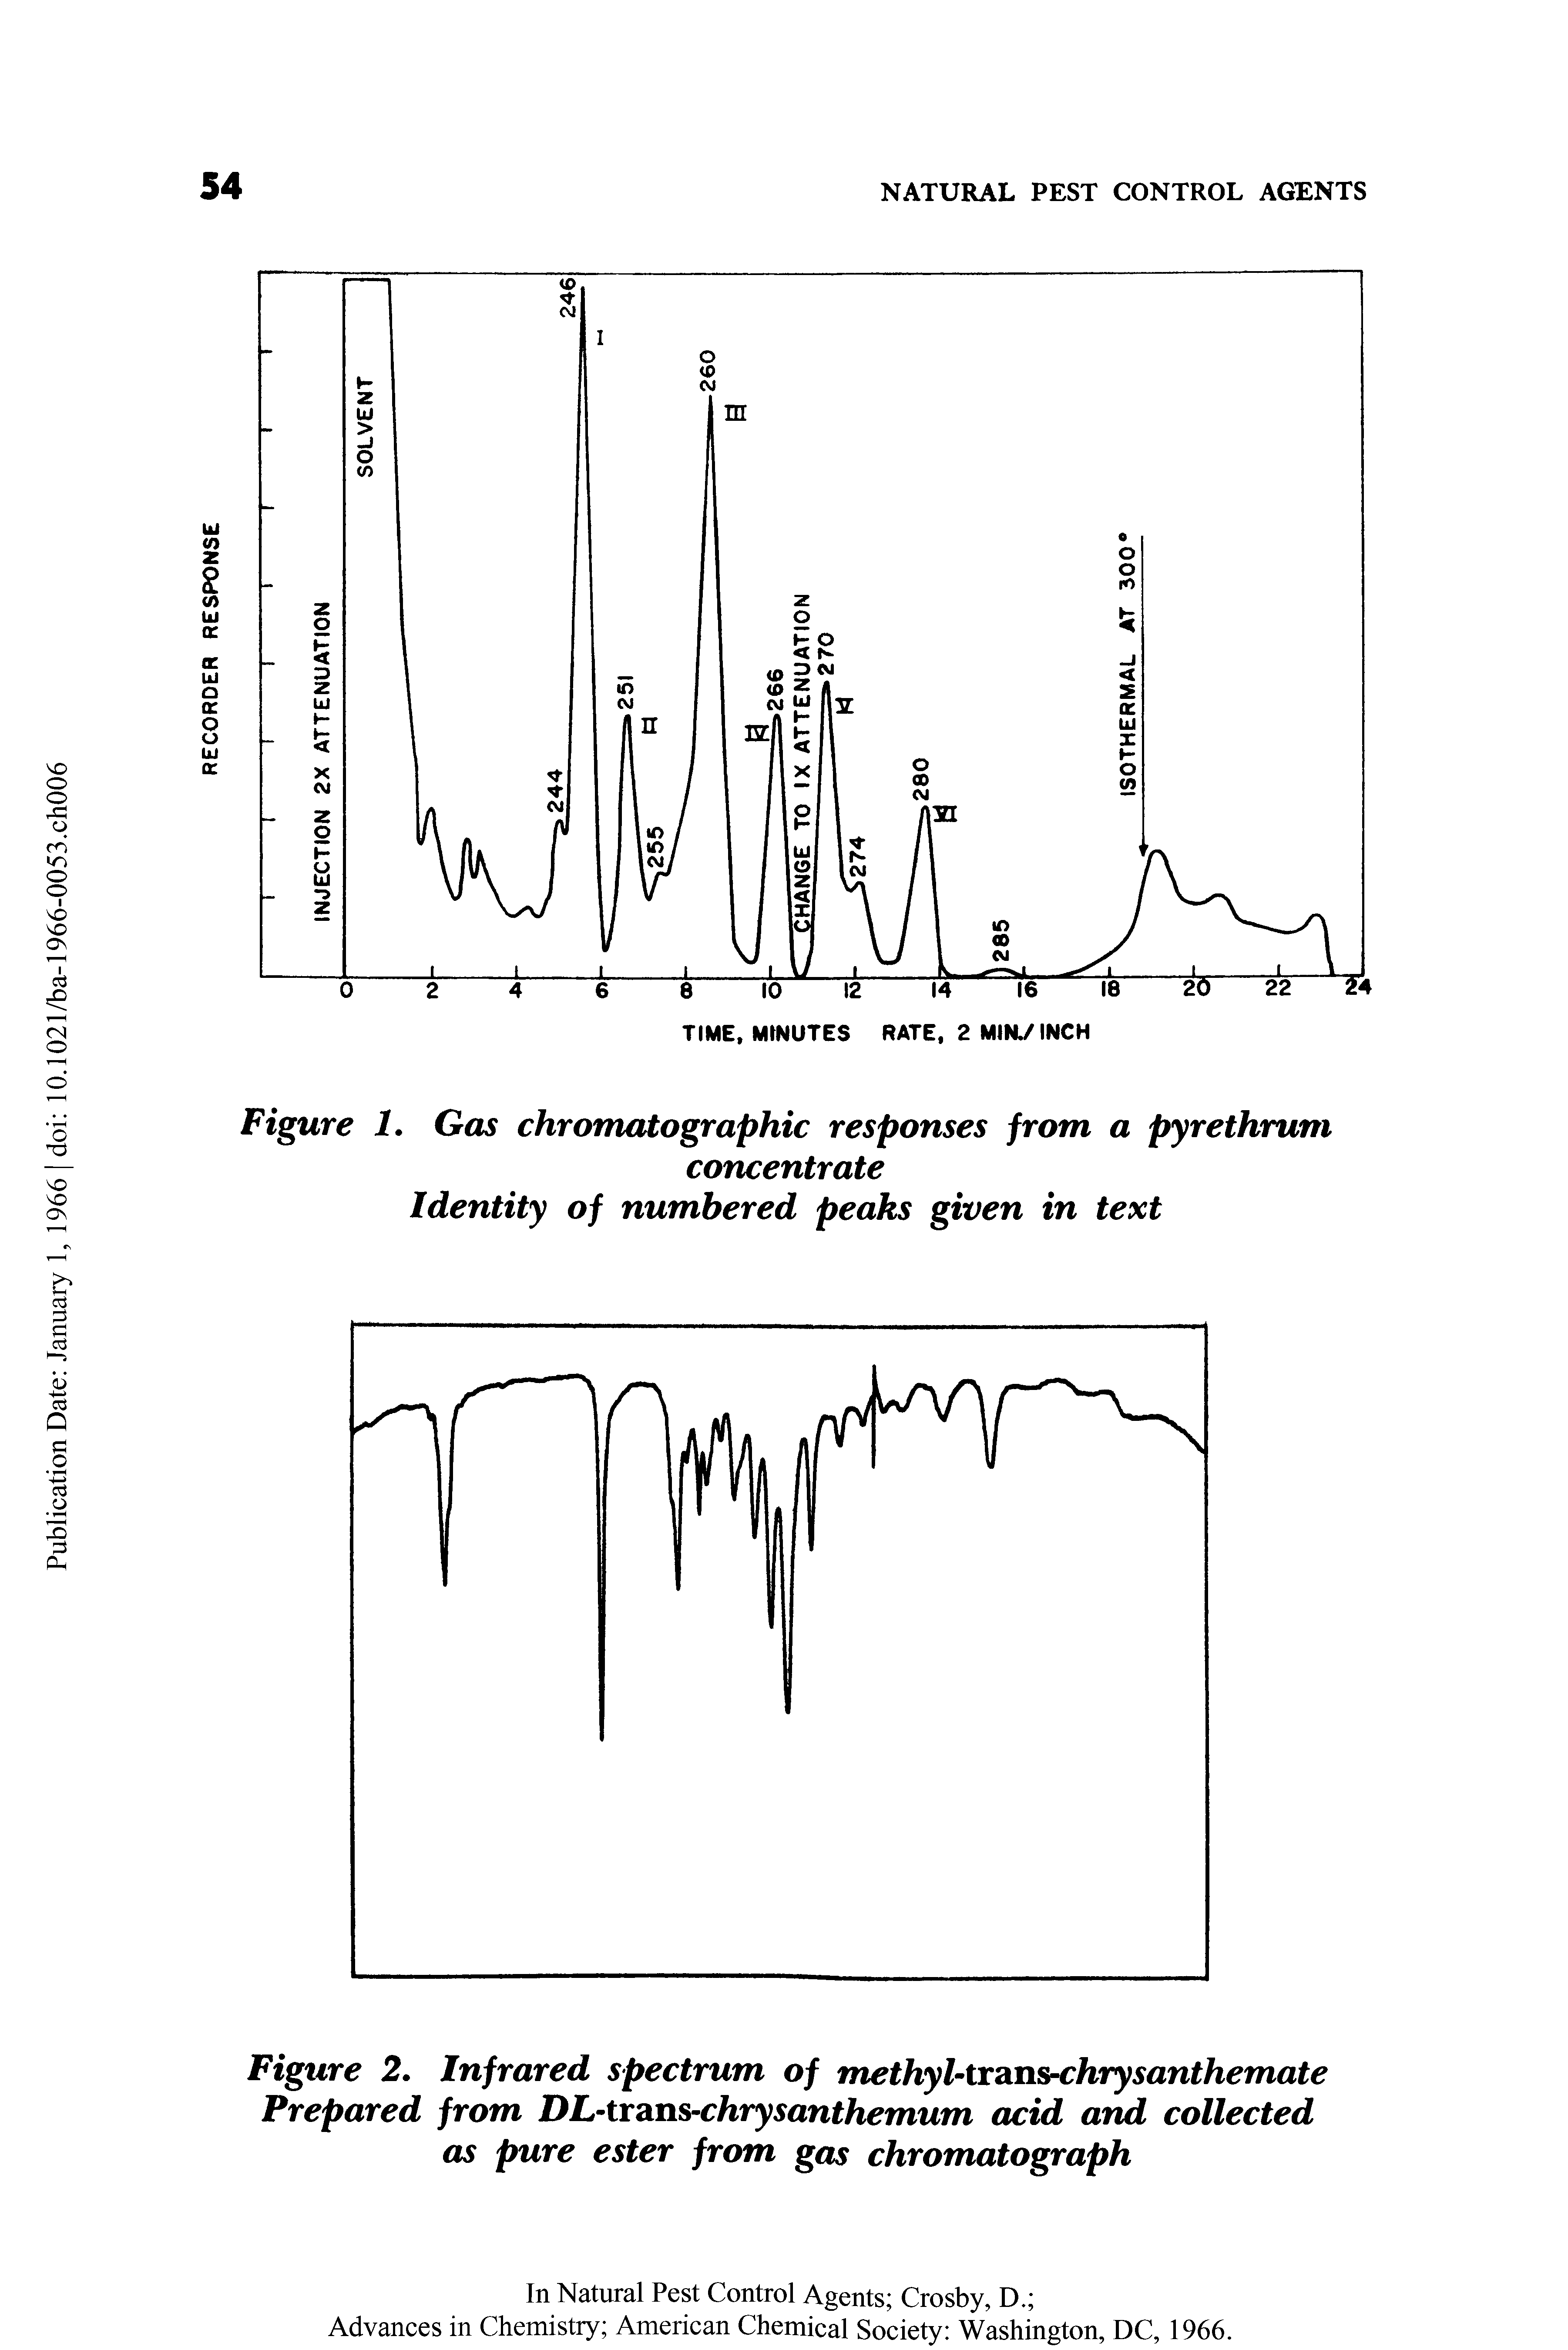 Figure 2. Infrared spectrum of methyl-trans-chrysanthemate Prepared from DL-trans-chrysanthemum acid and collected as pure ester from gas chromatograph...